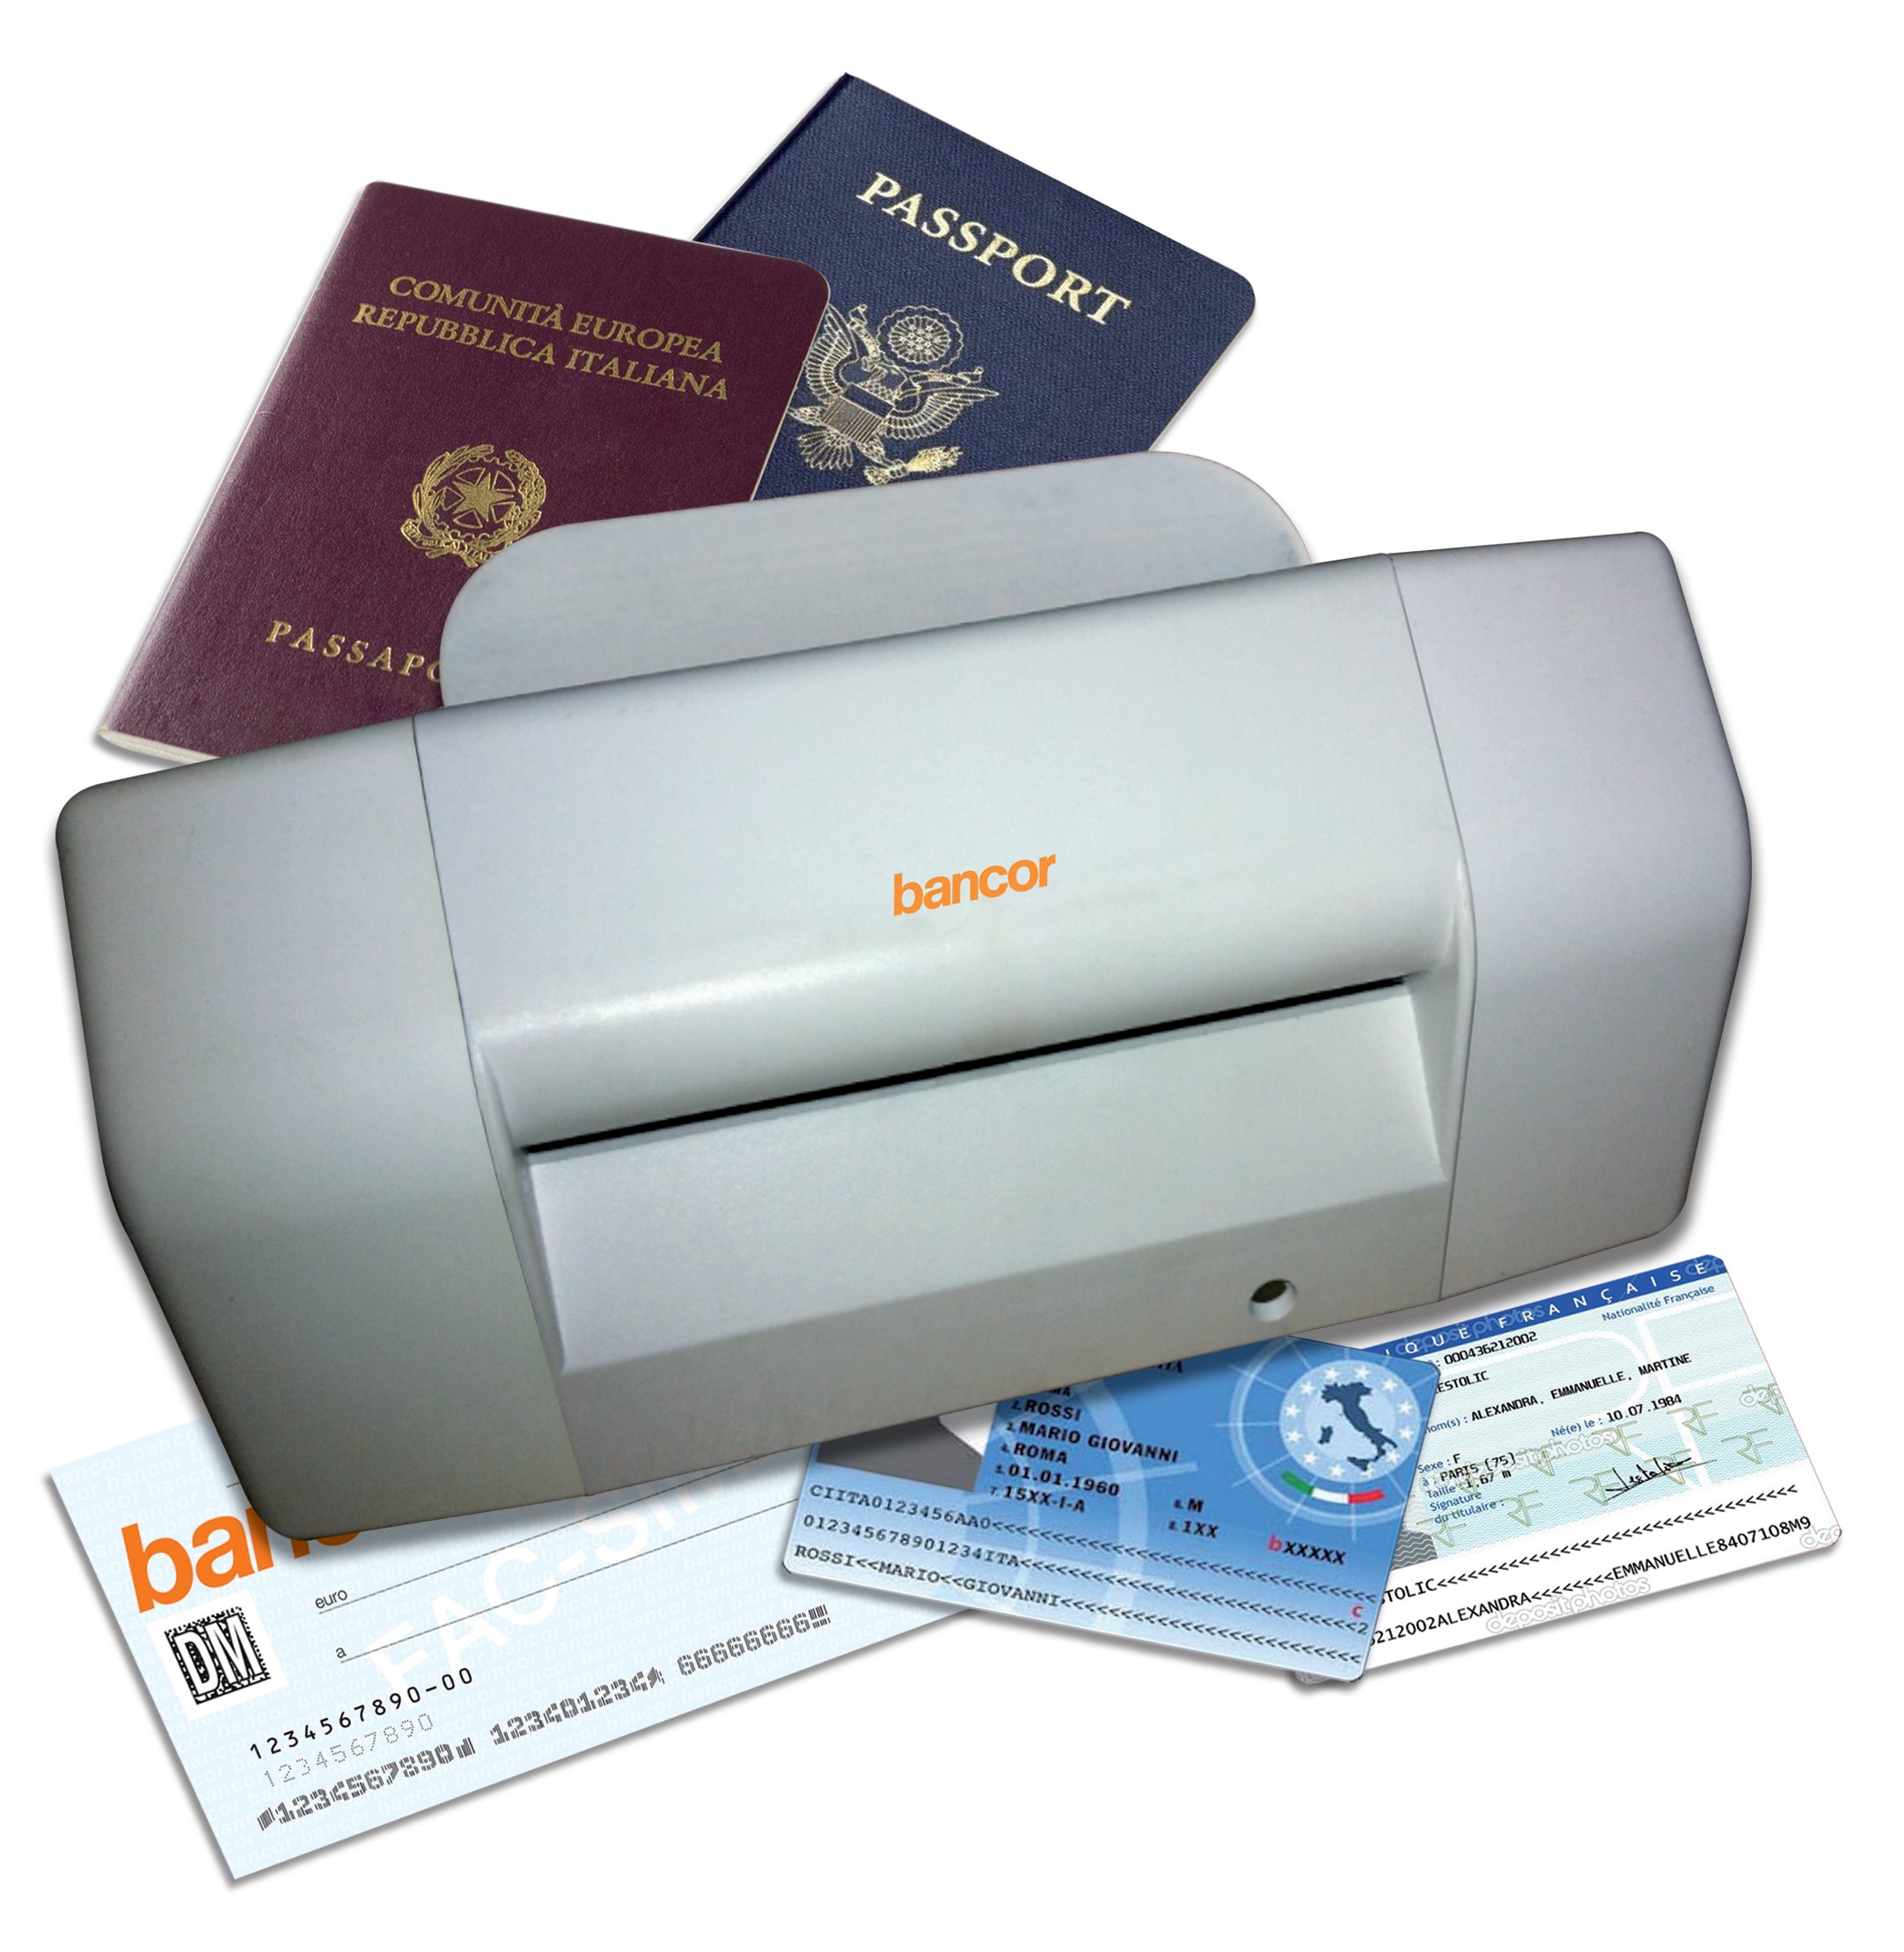 bPASS 60 - document management scanner up to A6 size - bancor